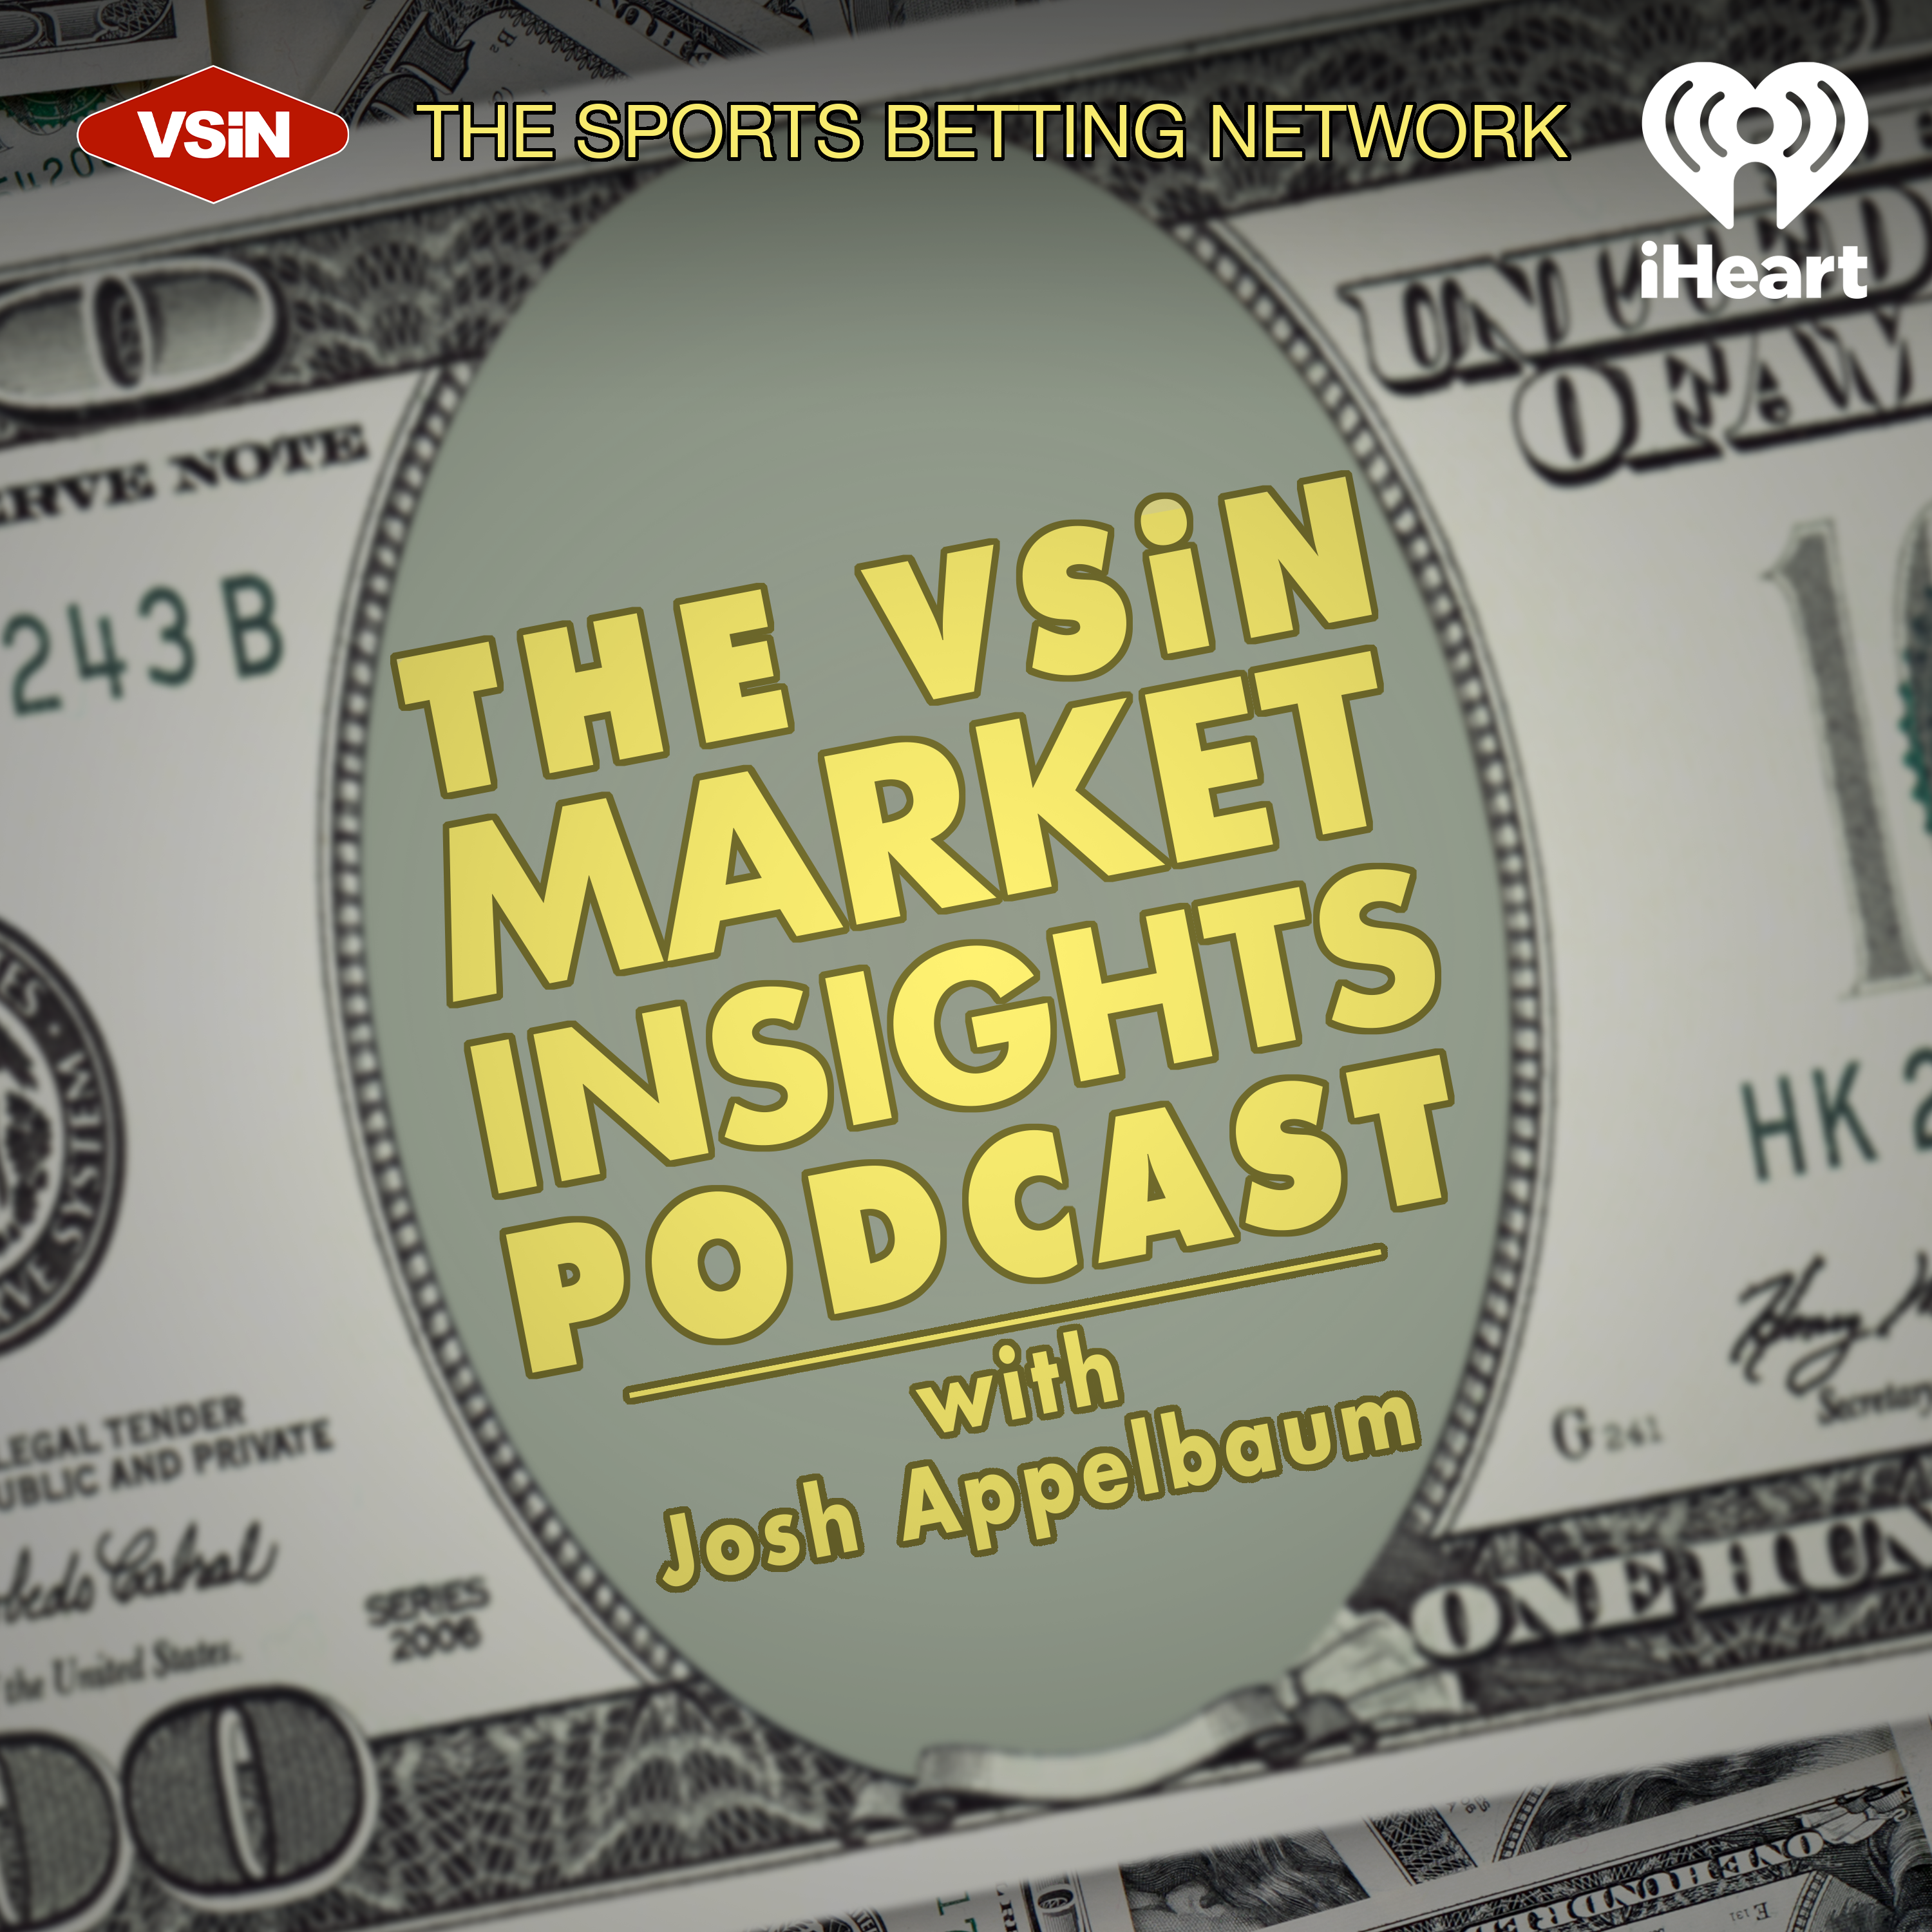 The VSiN Market Insights Podcast with Josh Appelbaum | April 18, 2022